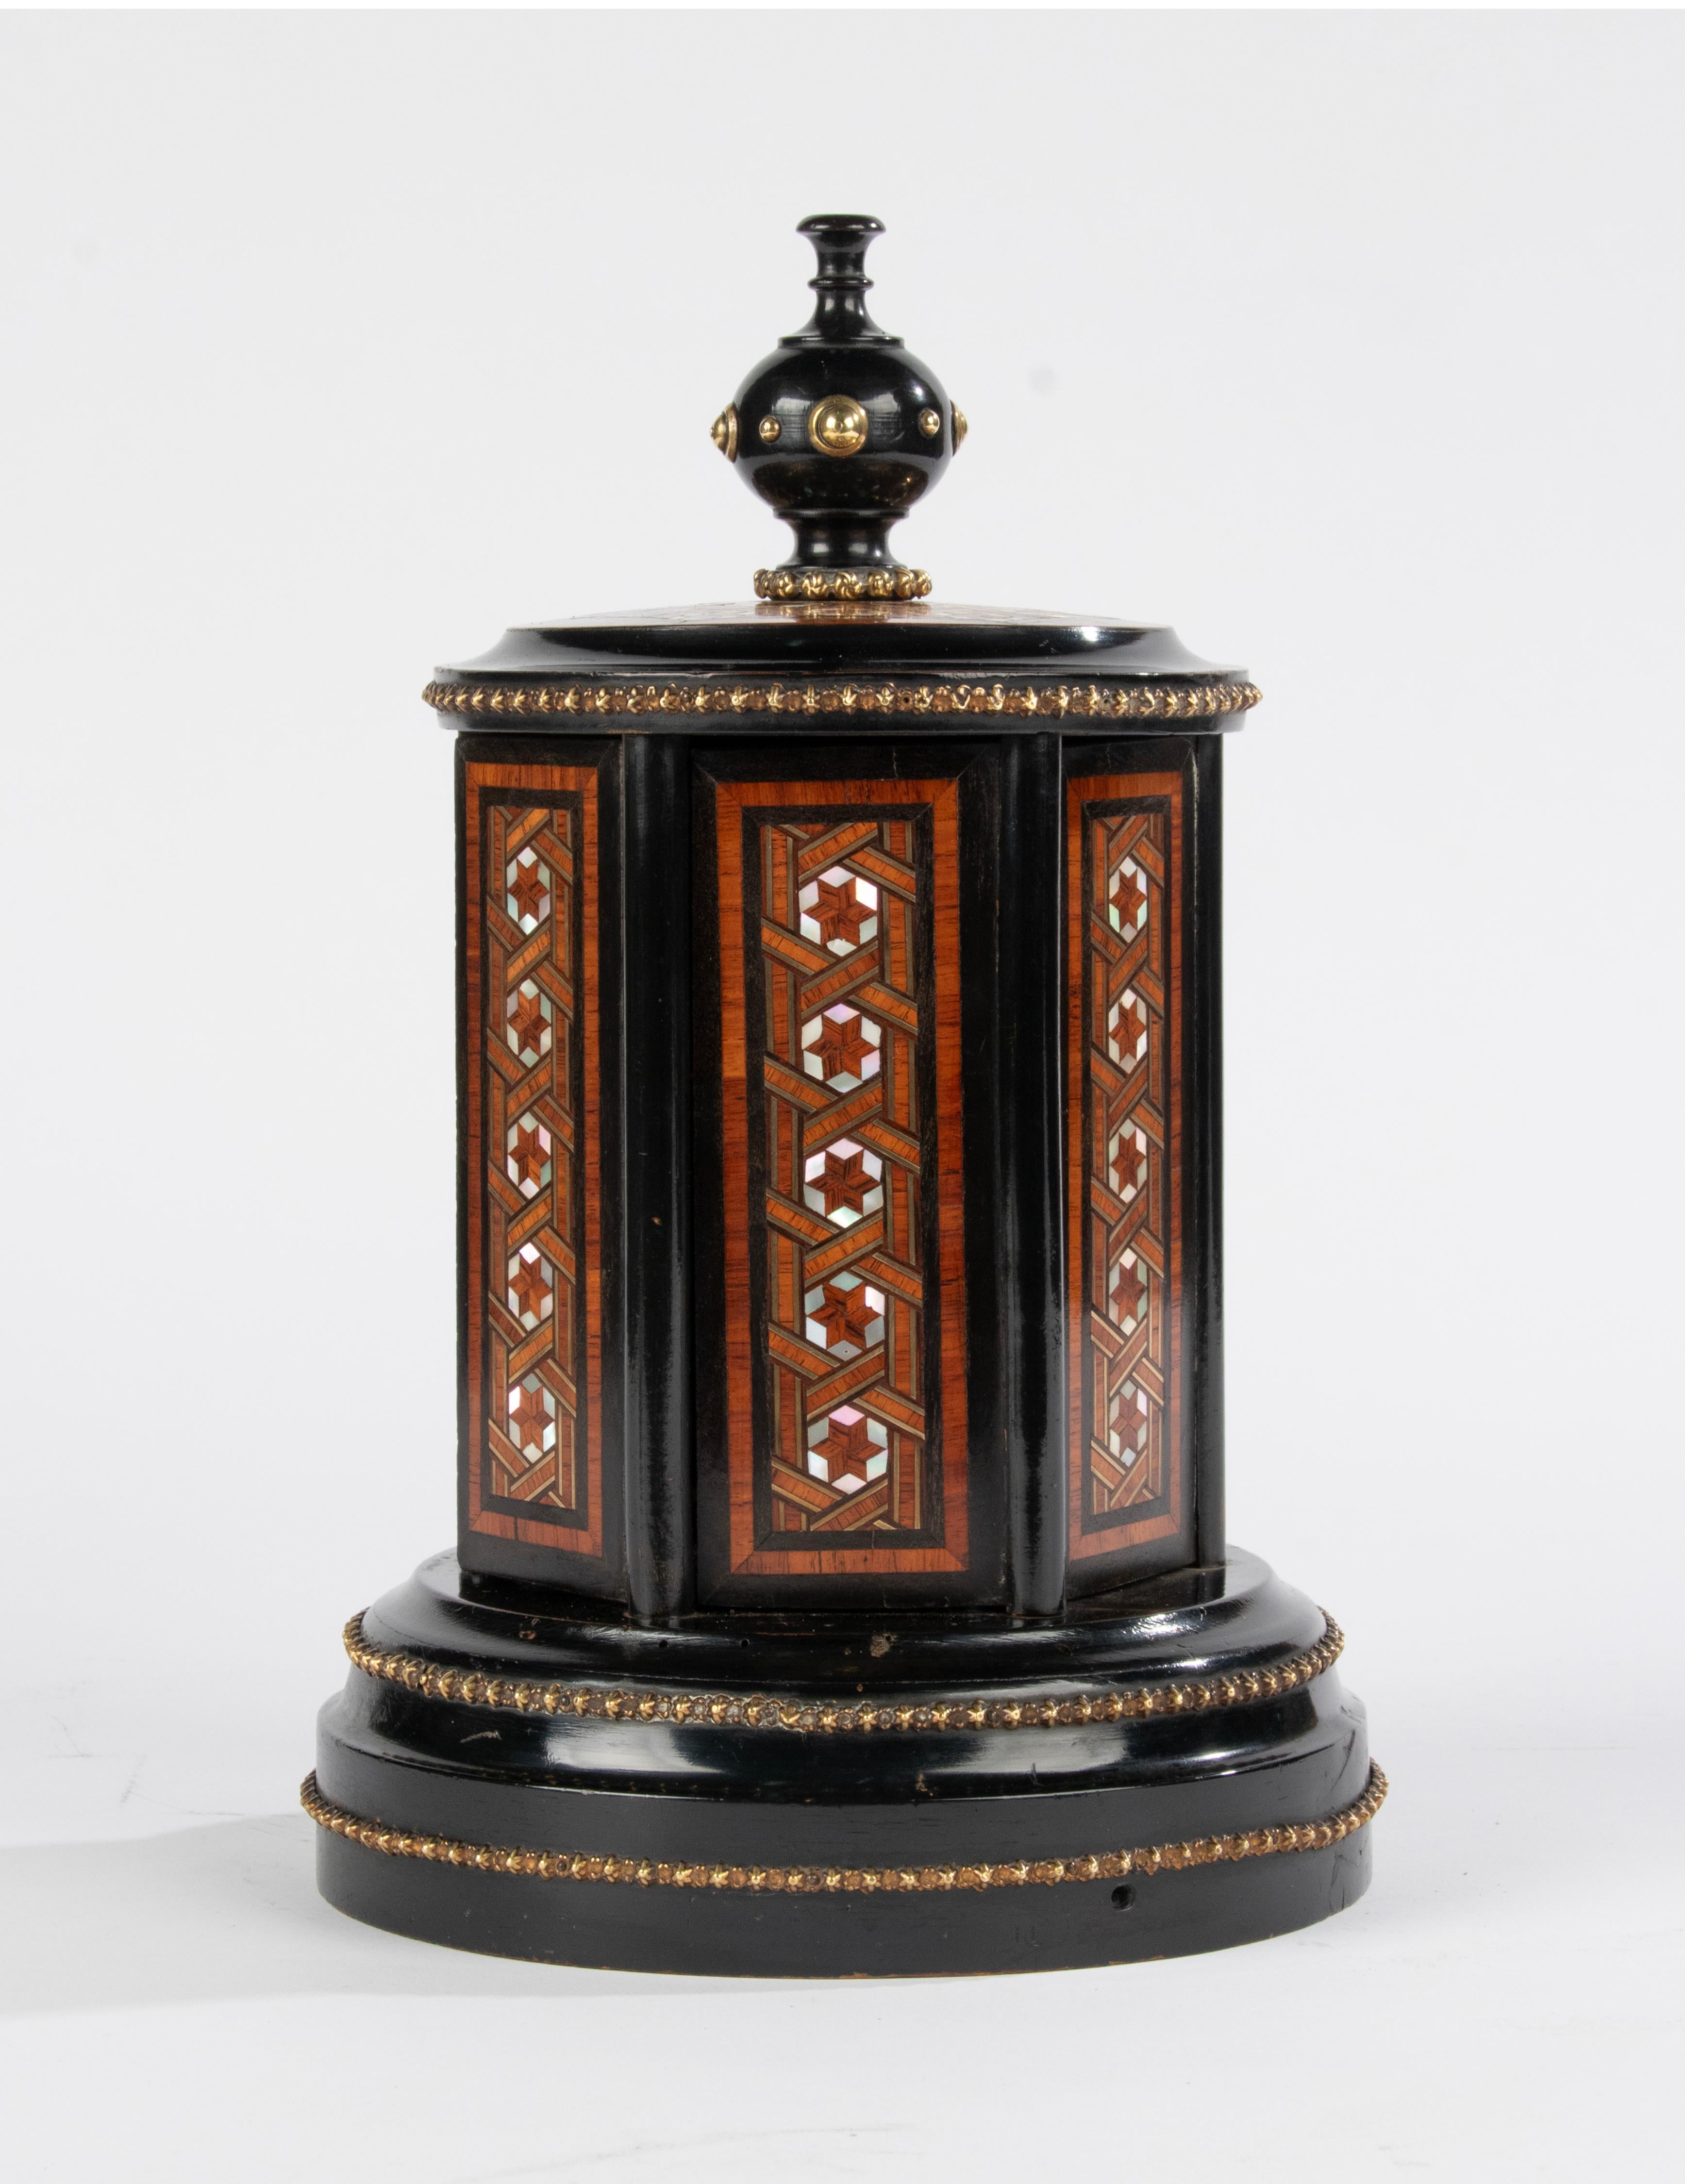 A beautiful antique wooden cigar carousel.
A typical object from the French Napoleon III period.
When you turn the top knob, the doors on all sides open and the cigars appear.
The cigar carousel is beautifully inlaid with various types of wood.
The